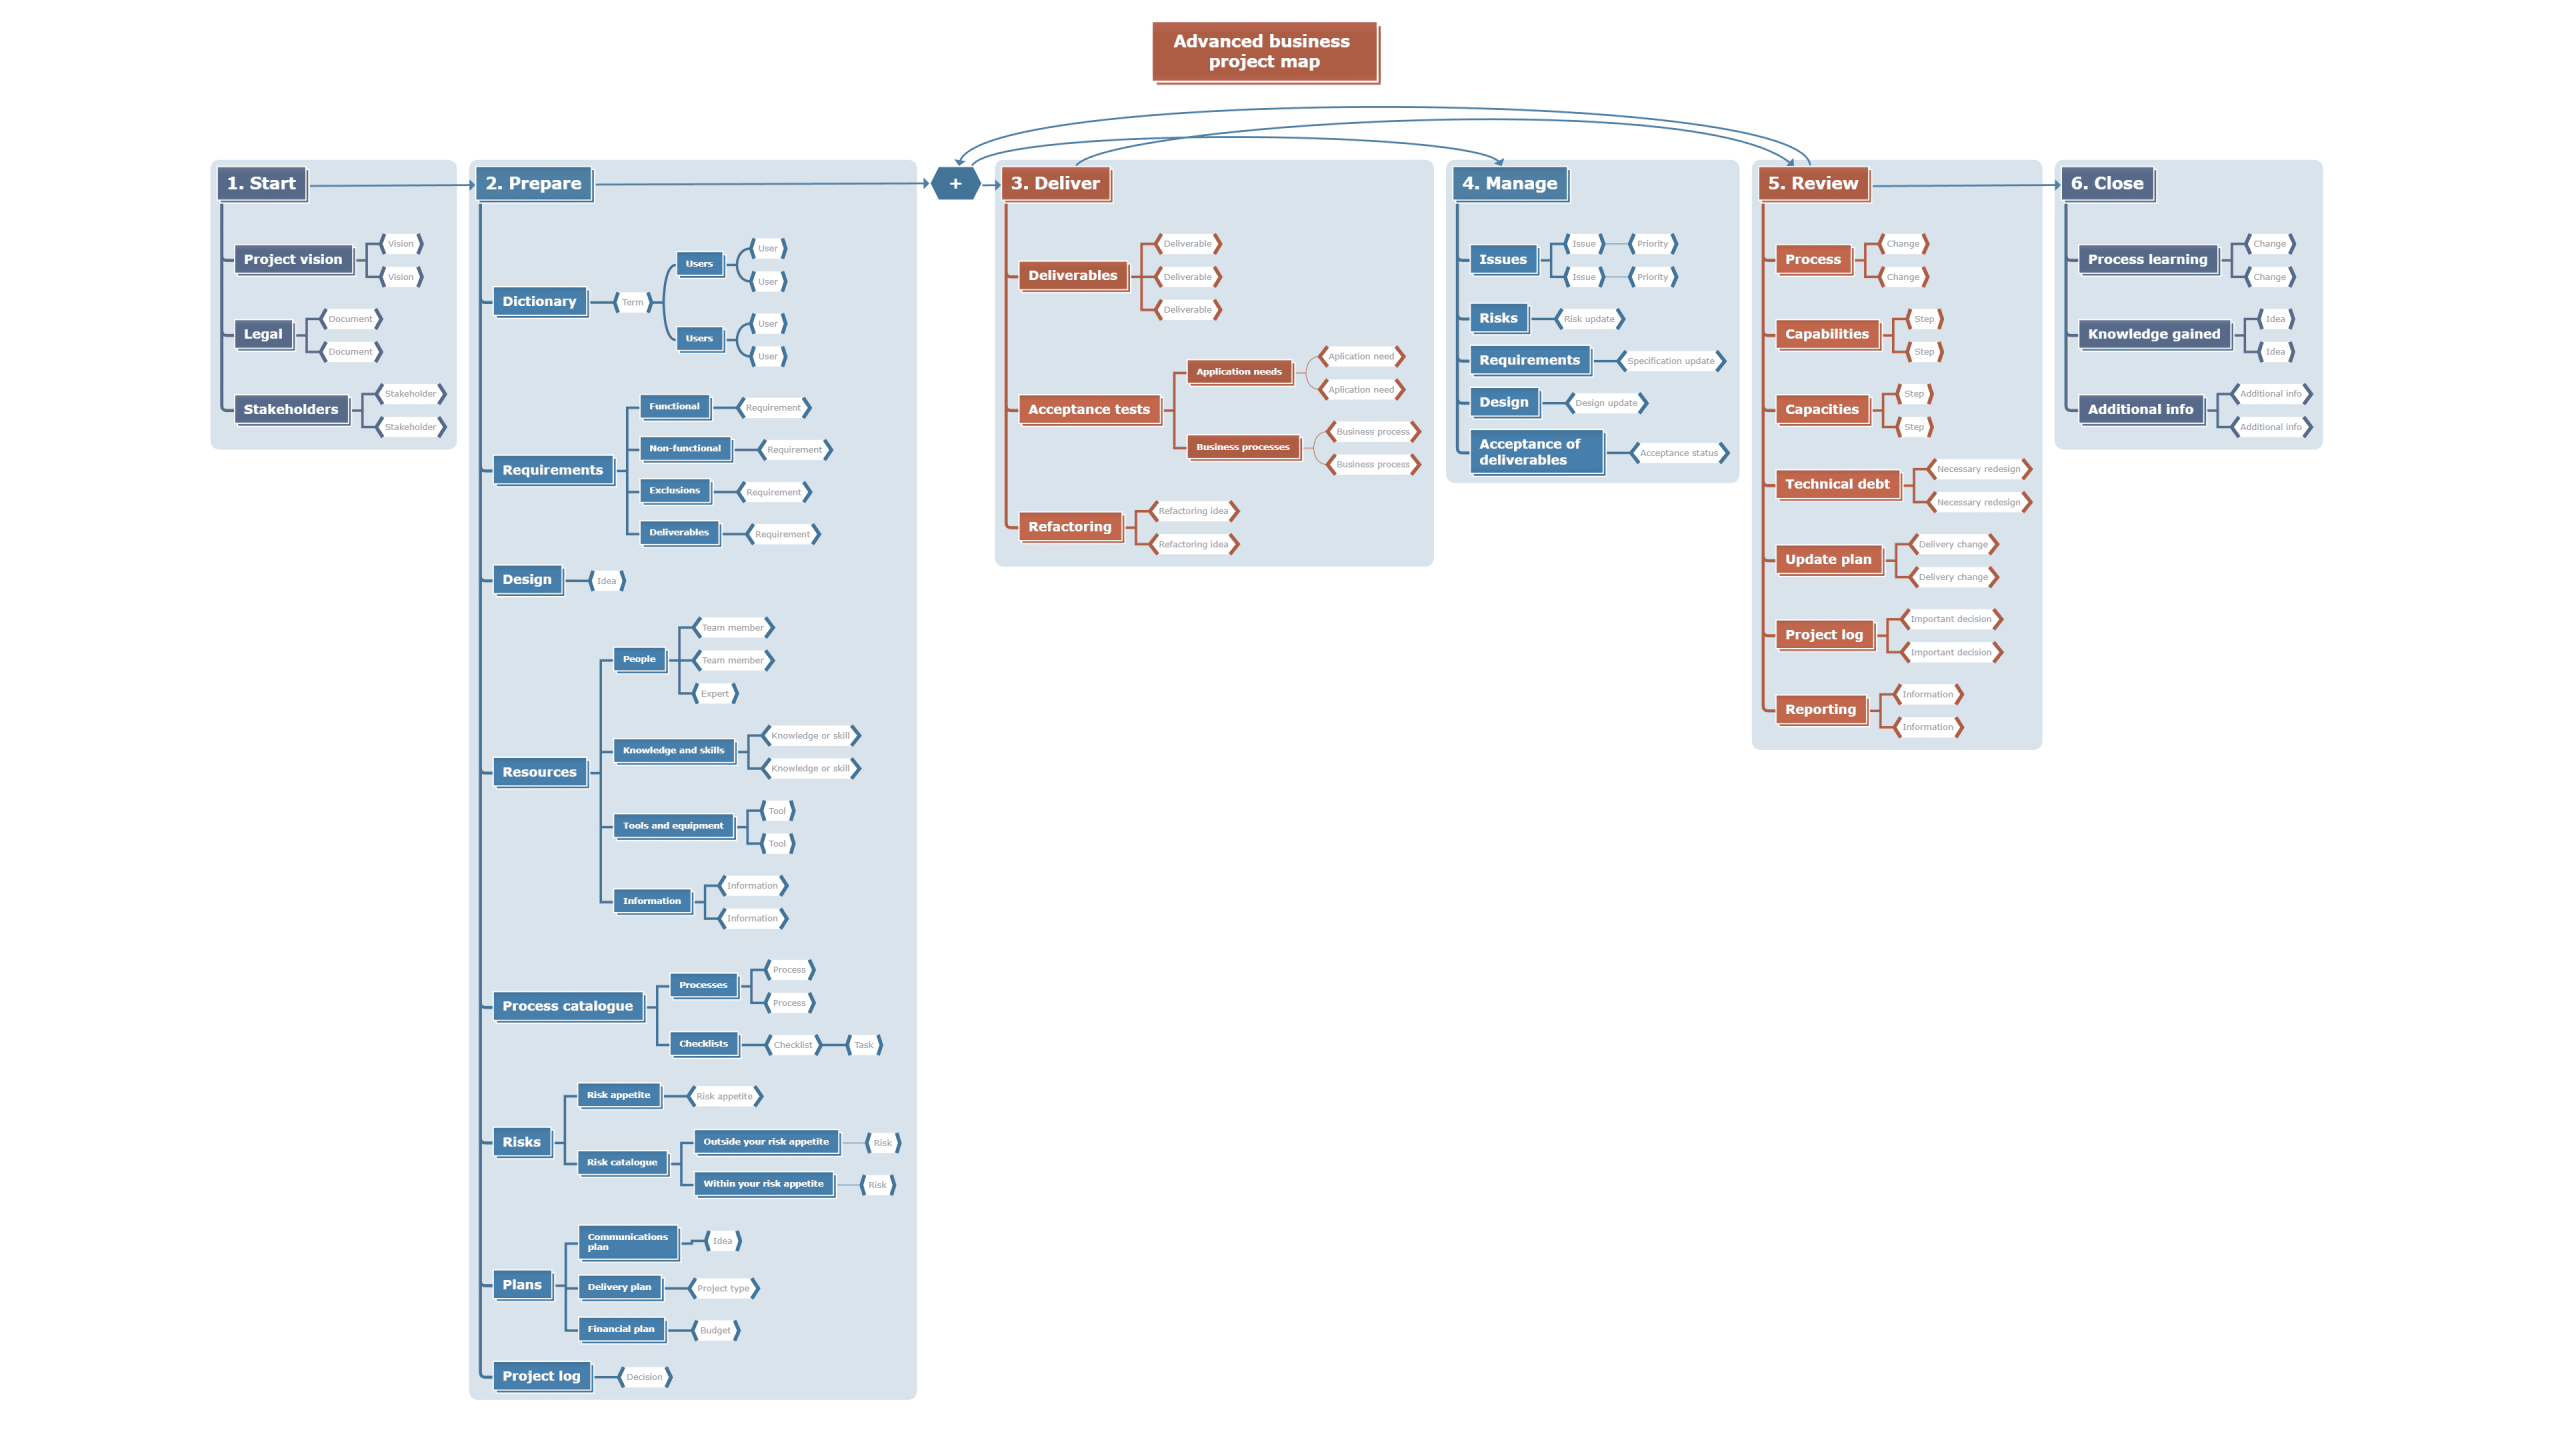 Advanced business project - mind map for project management roles